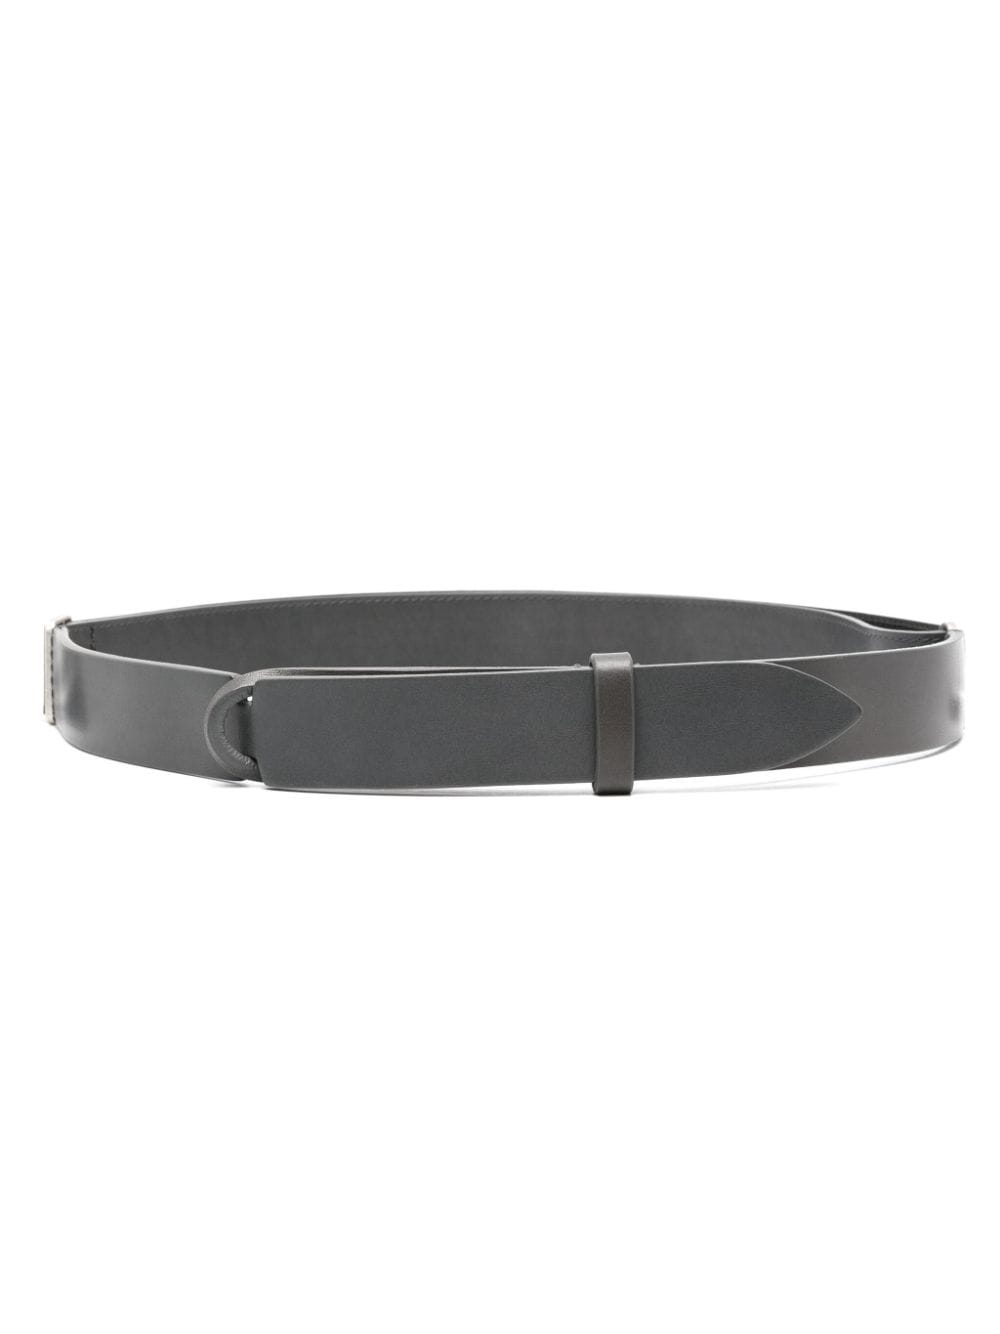 no-buckle leather belt